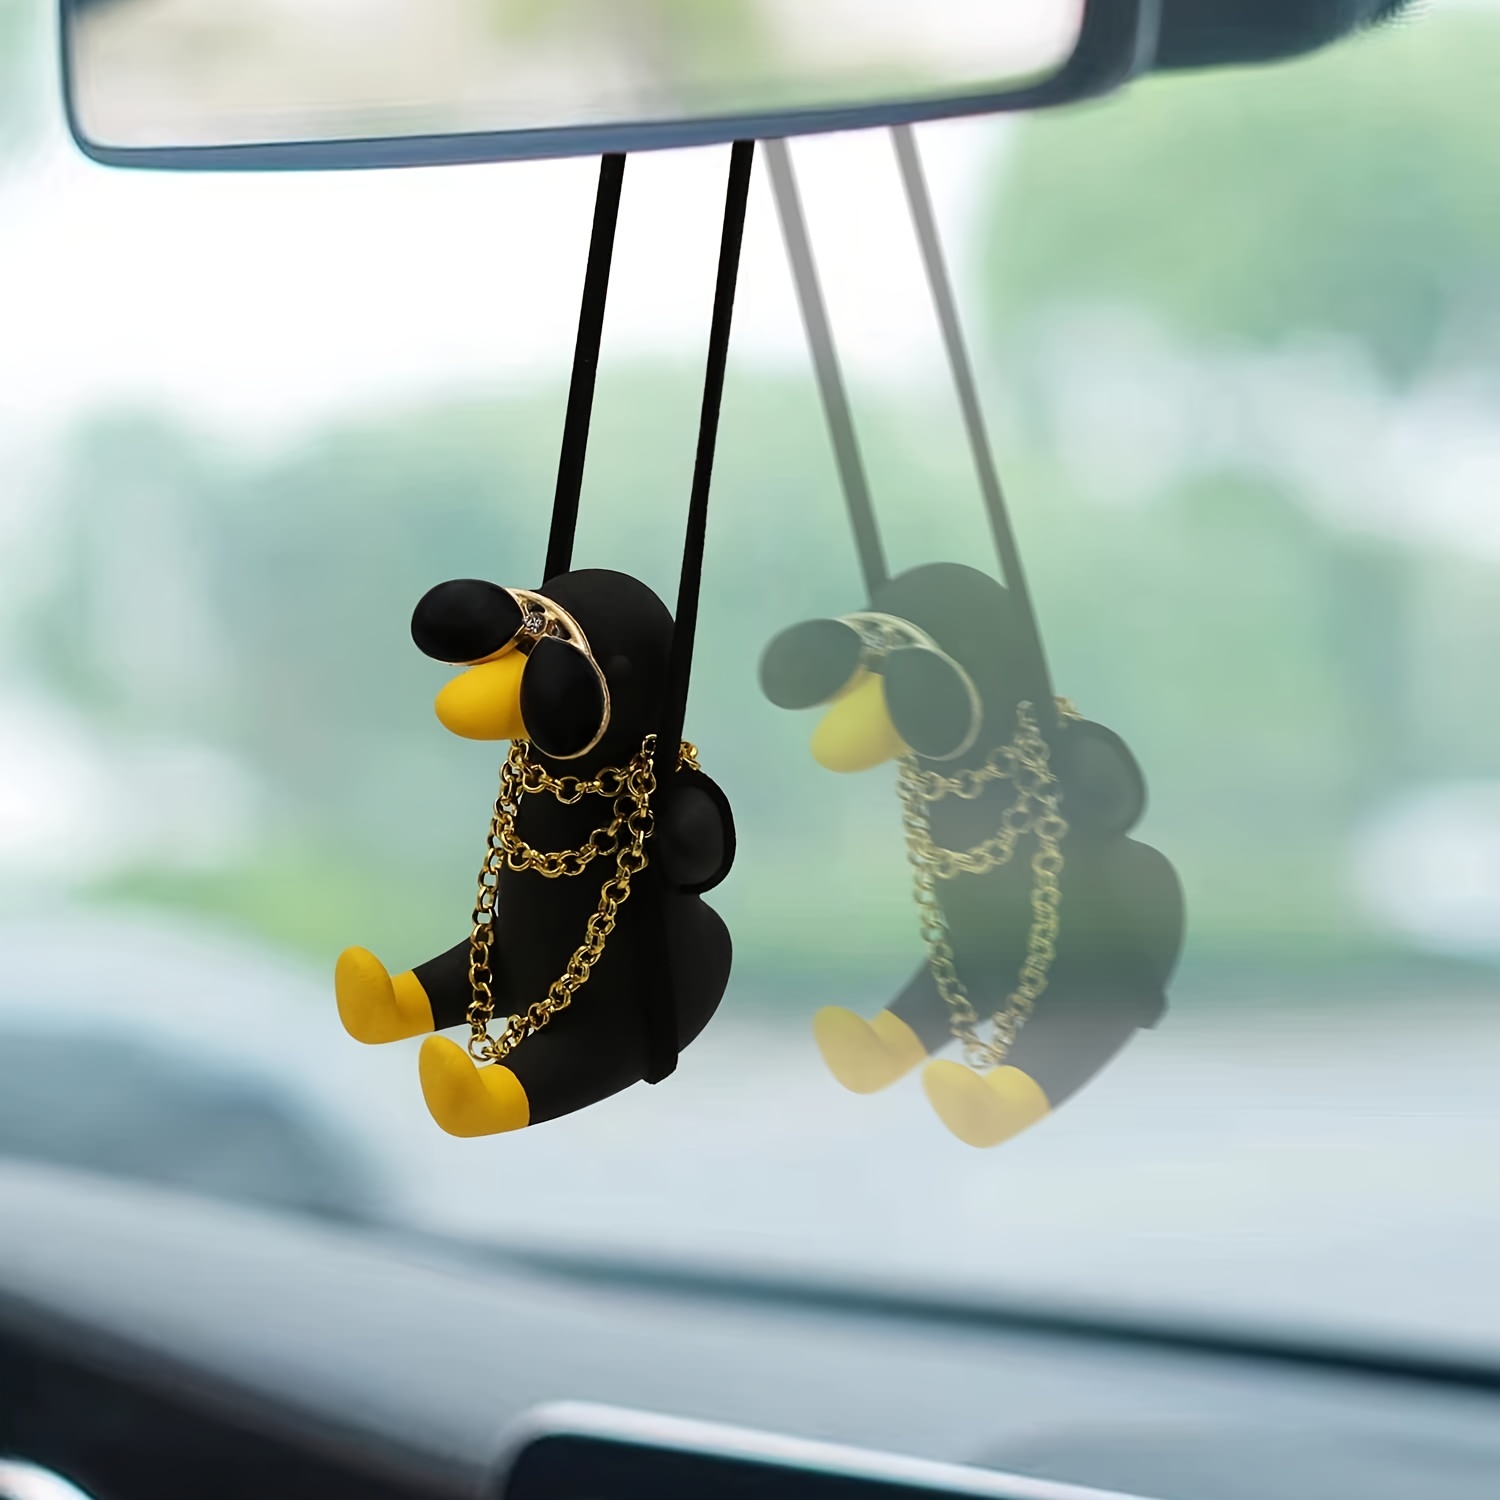 Swinging Car Duck Duck Swinging Duck Swinging Ornament With Sunglasses 2  Pieces Cute Swinging Duck Pendant Rearview Mirror Ornaments Accessory Car  Int